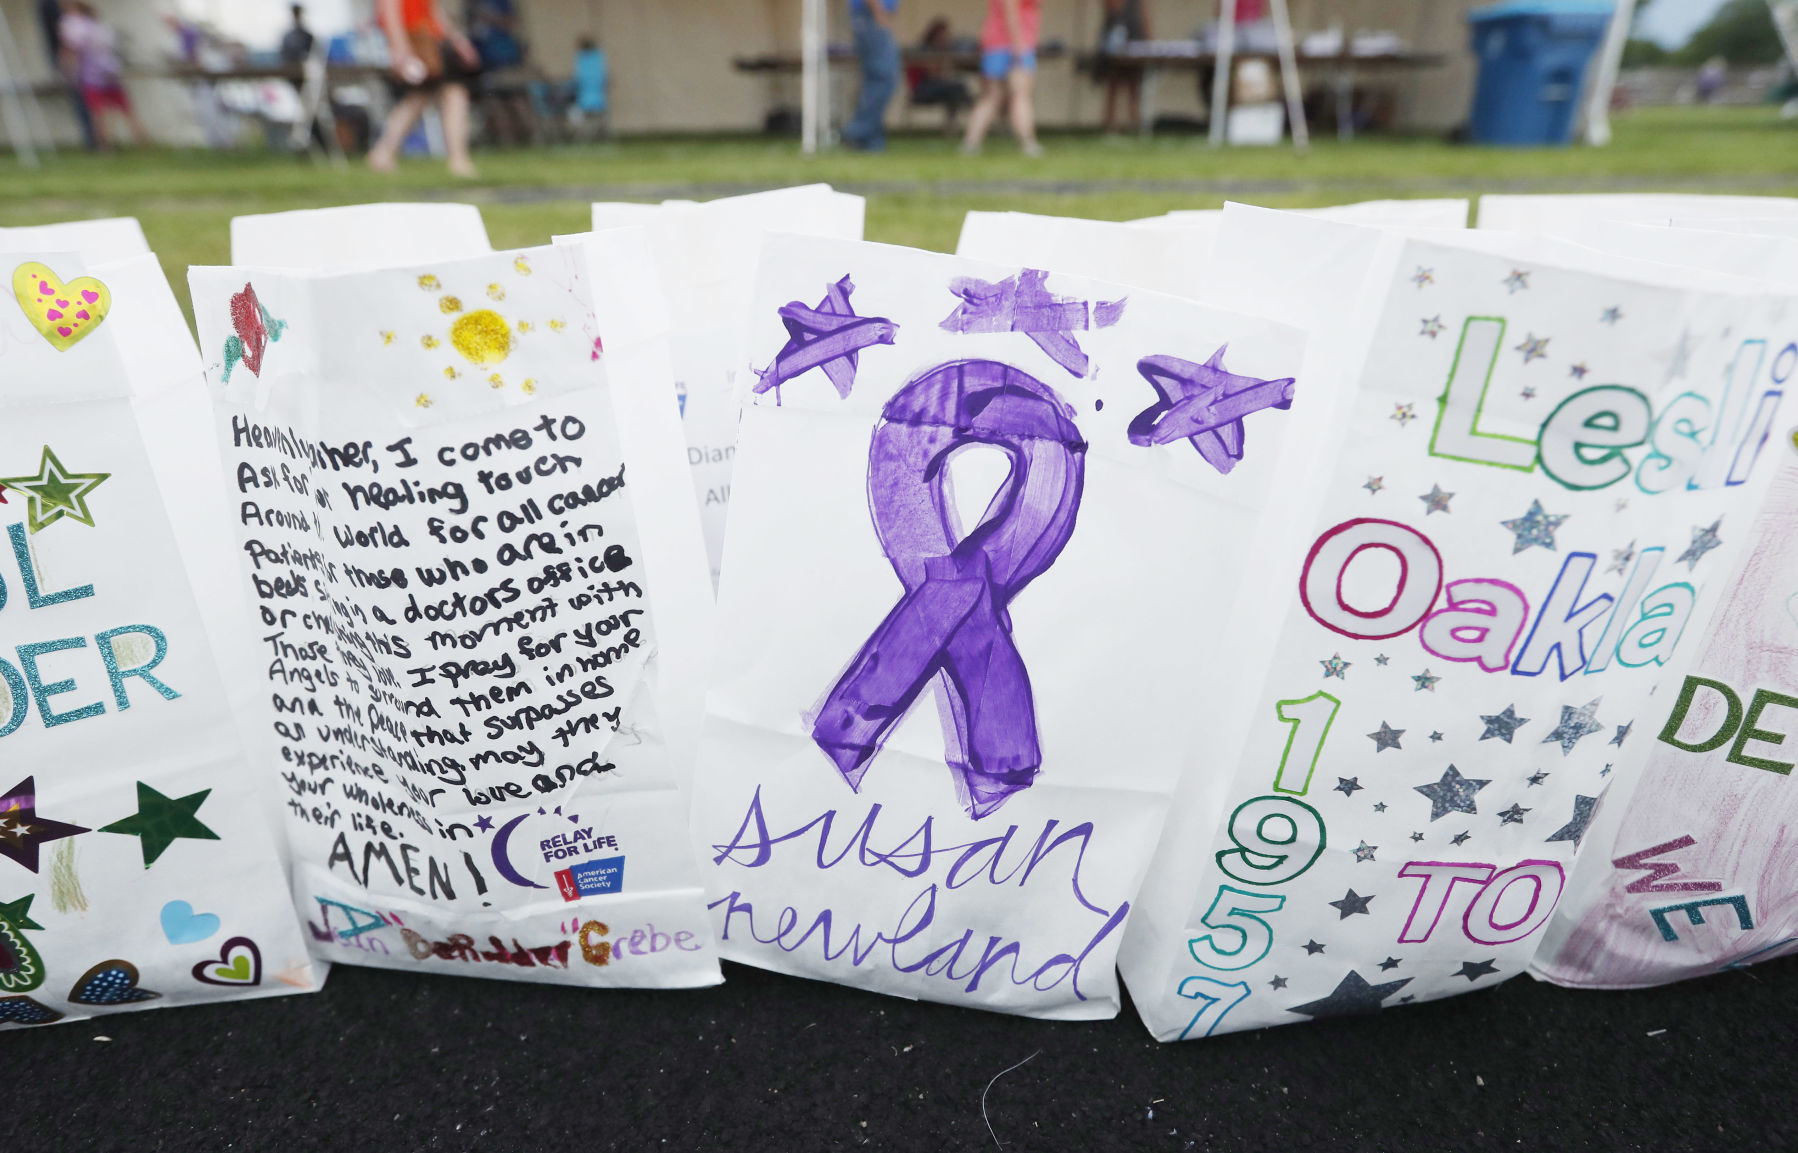 Relay for Life is Saturday | Newberry Observer